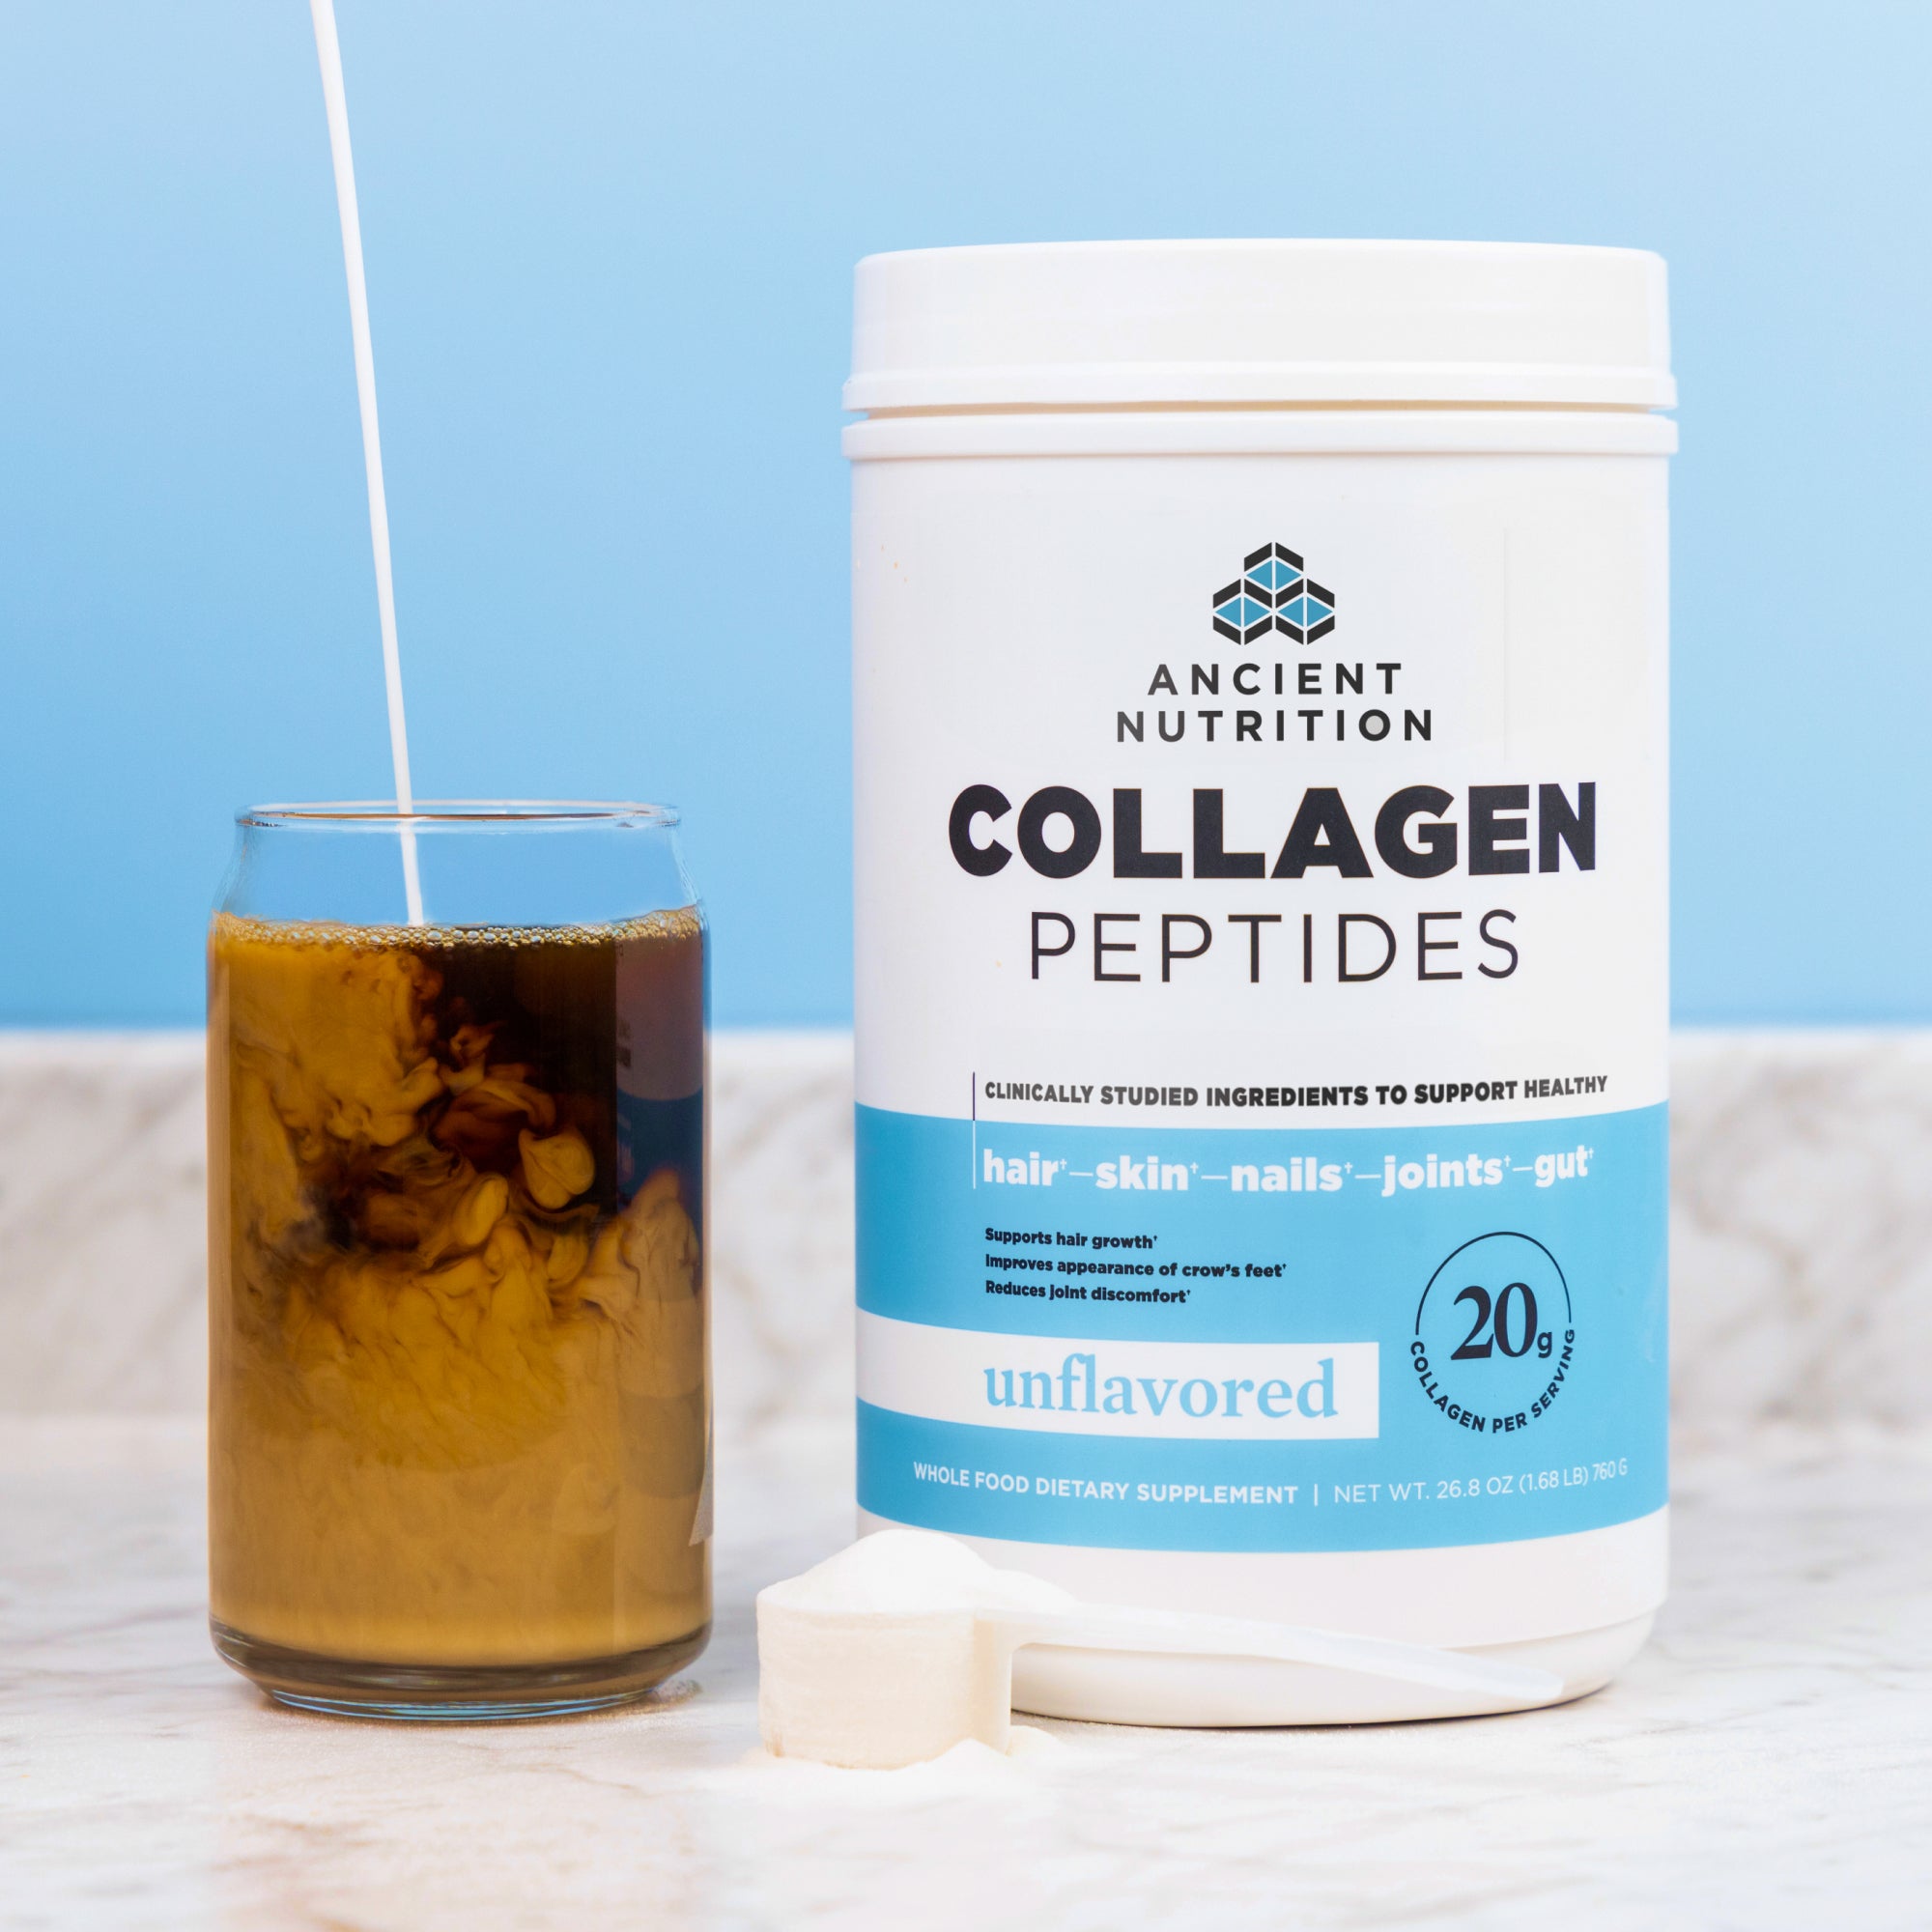 collagen peptides powder next to an iced coffee in a glass cup